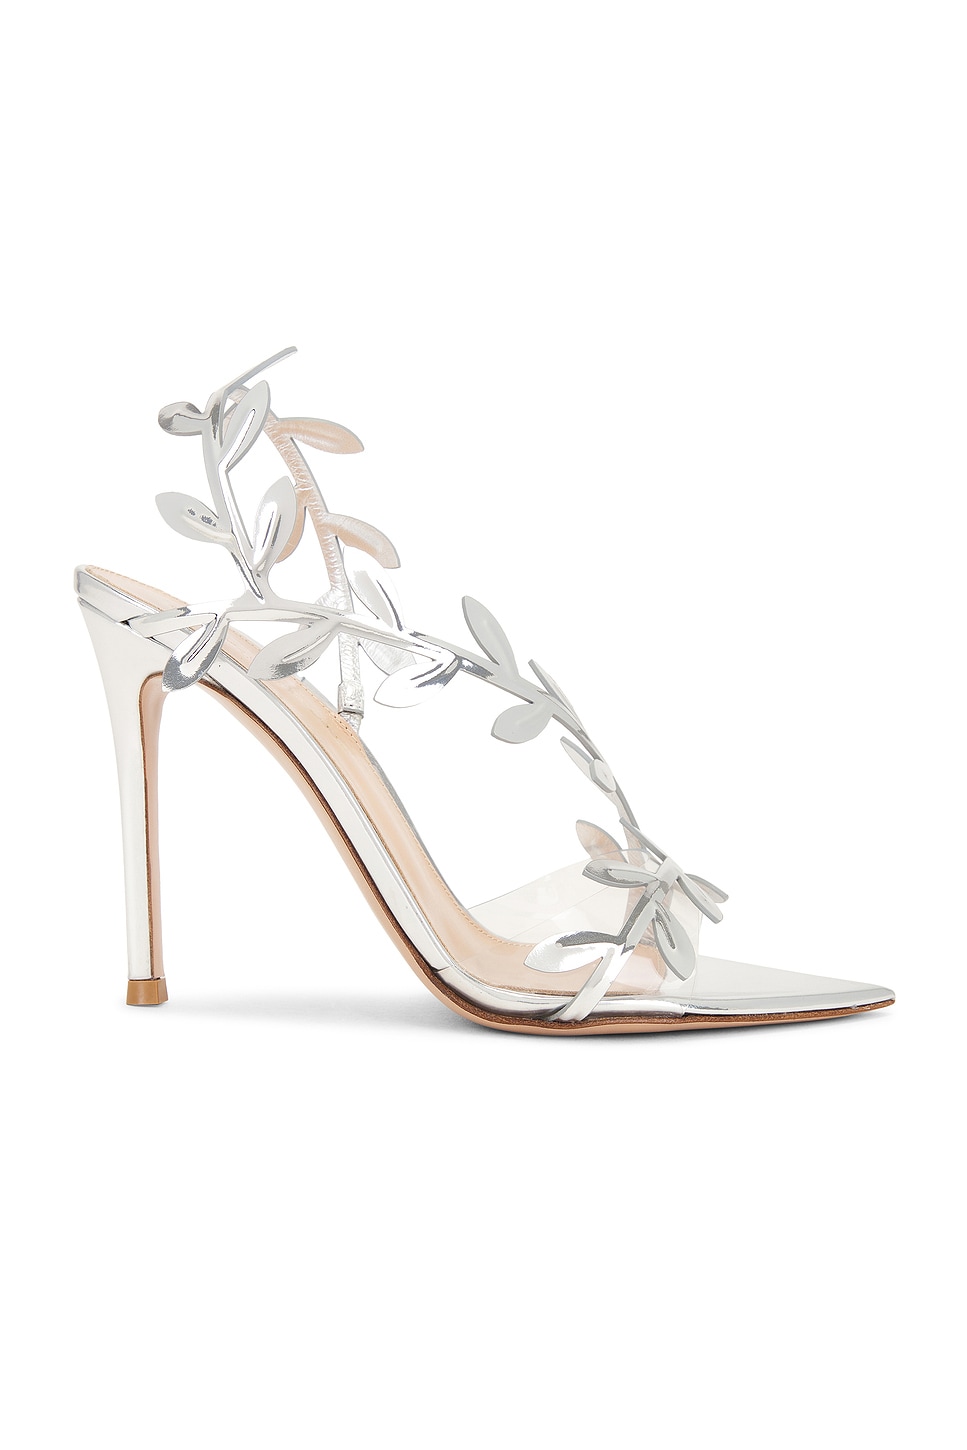 Image 1 of Gianvito Rossi Glass & Metal Heels in Transparent & Silver